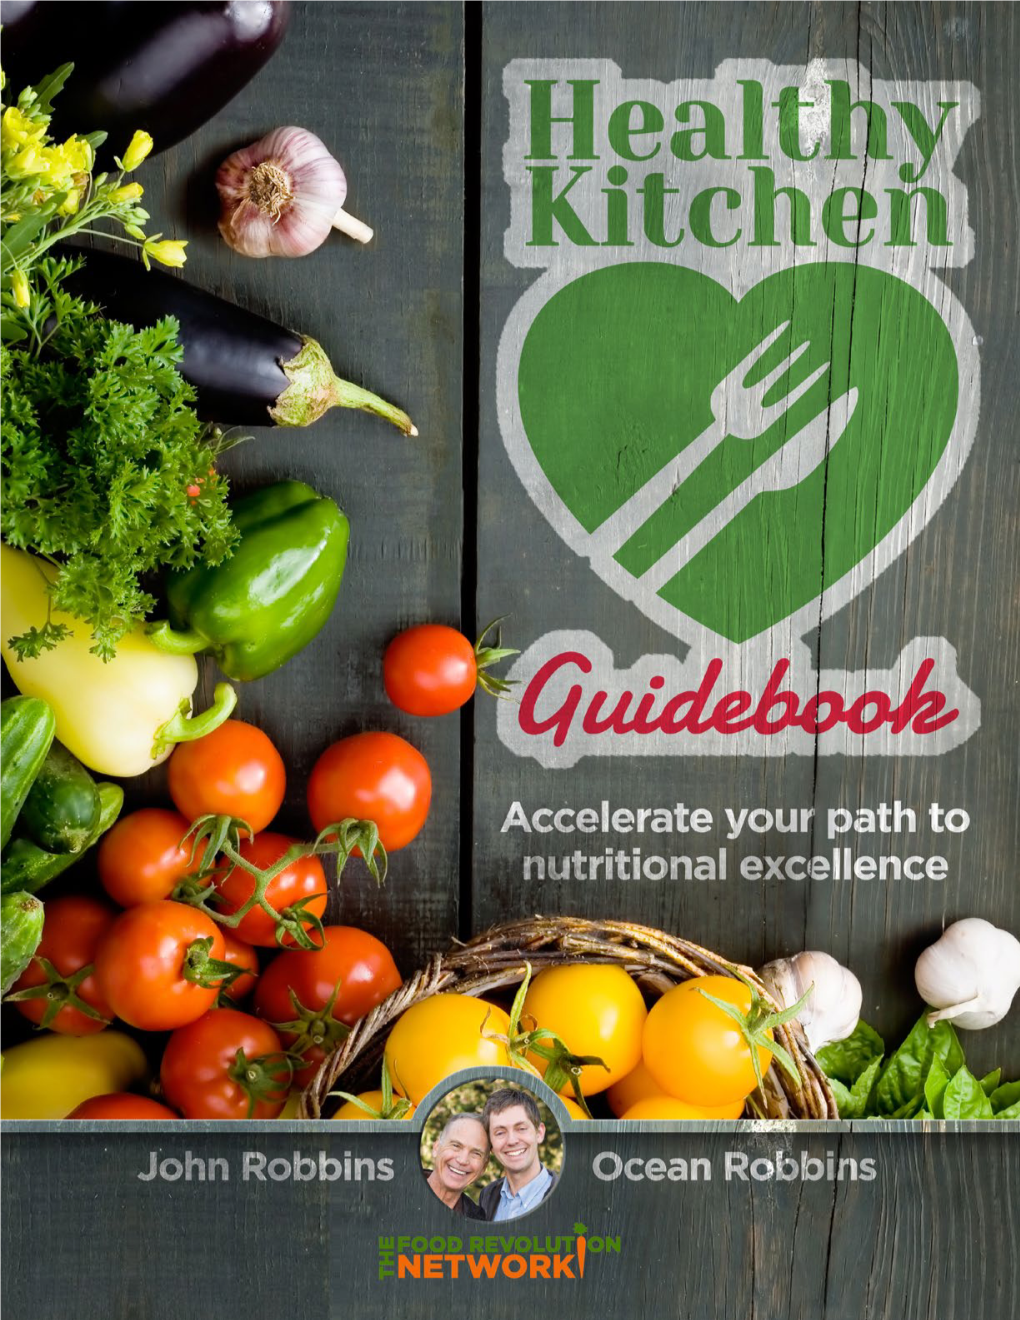 The Healthy Kitchen Guidebook from the Food